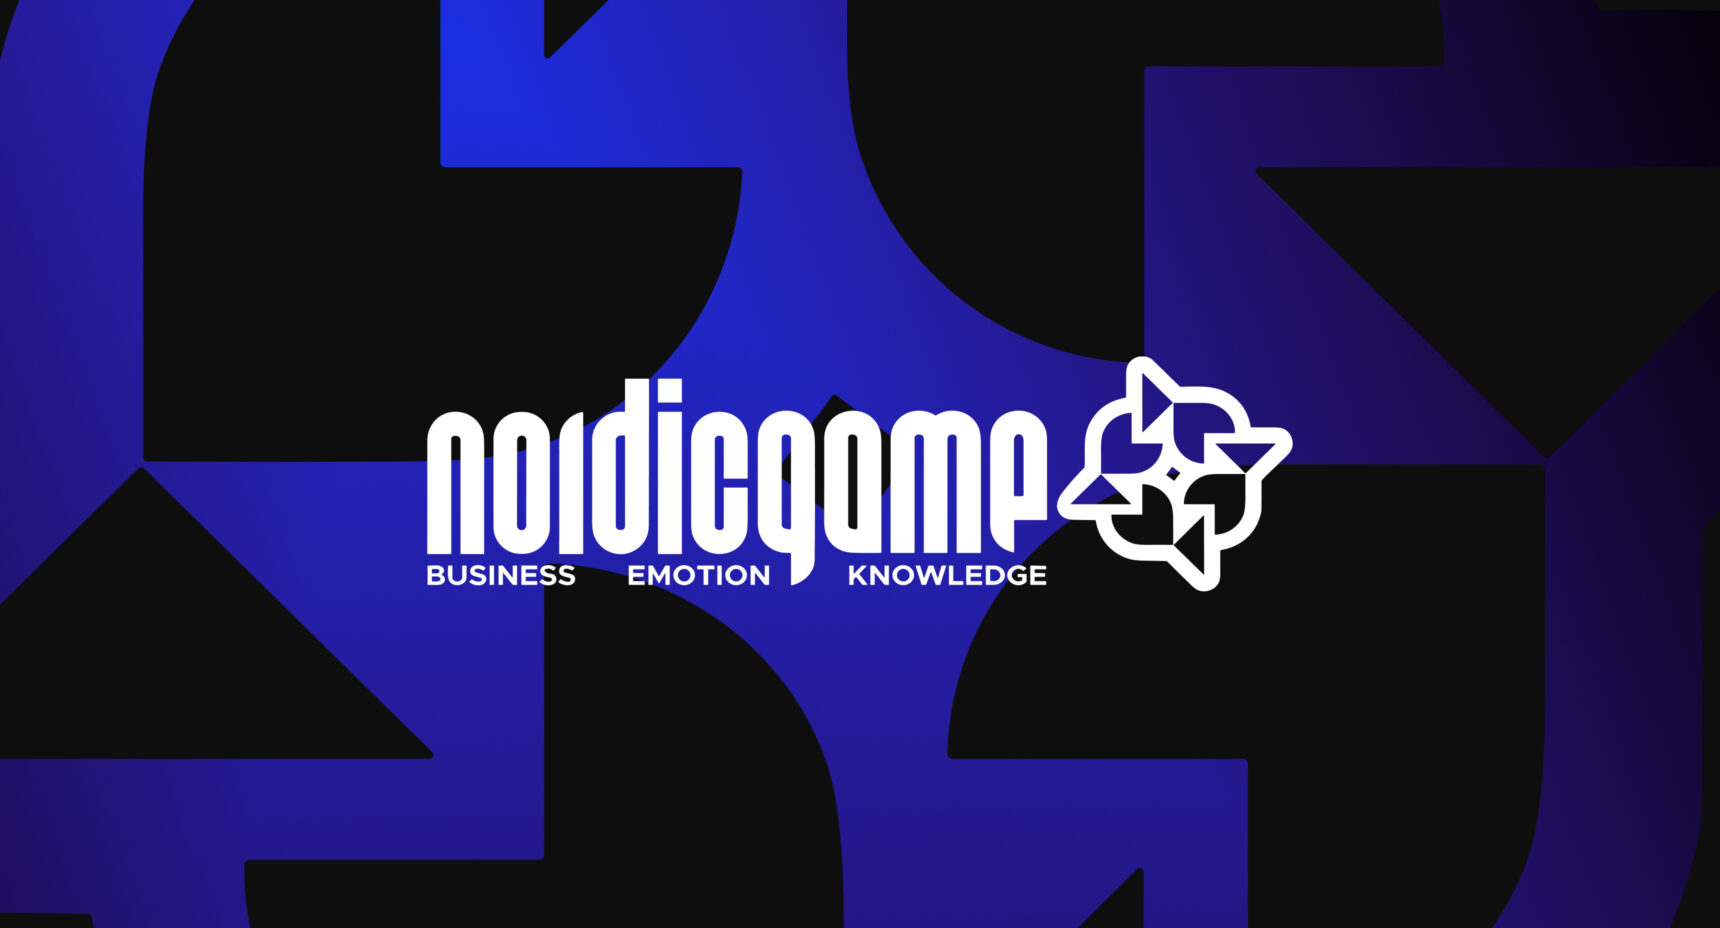 Meet Room 8 Group at Nordic Game 2023